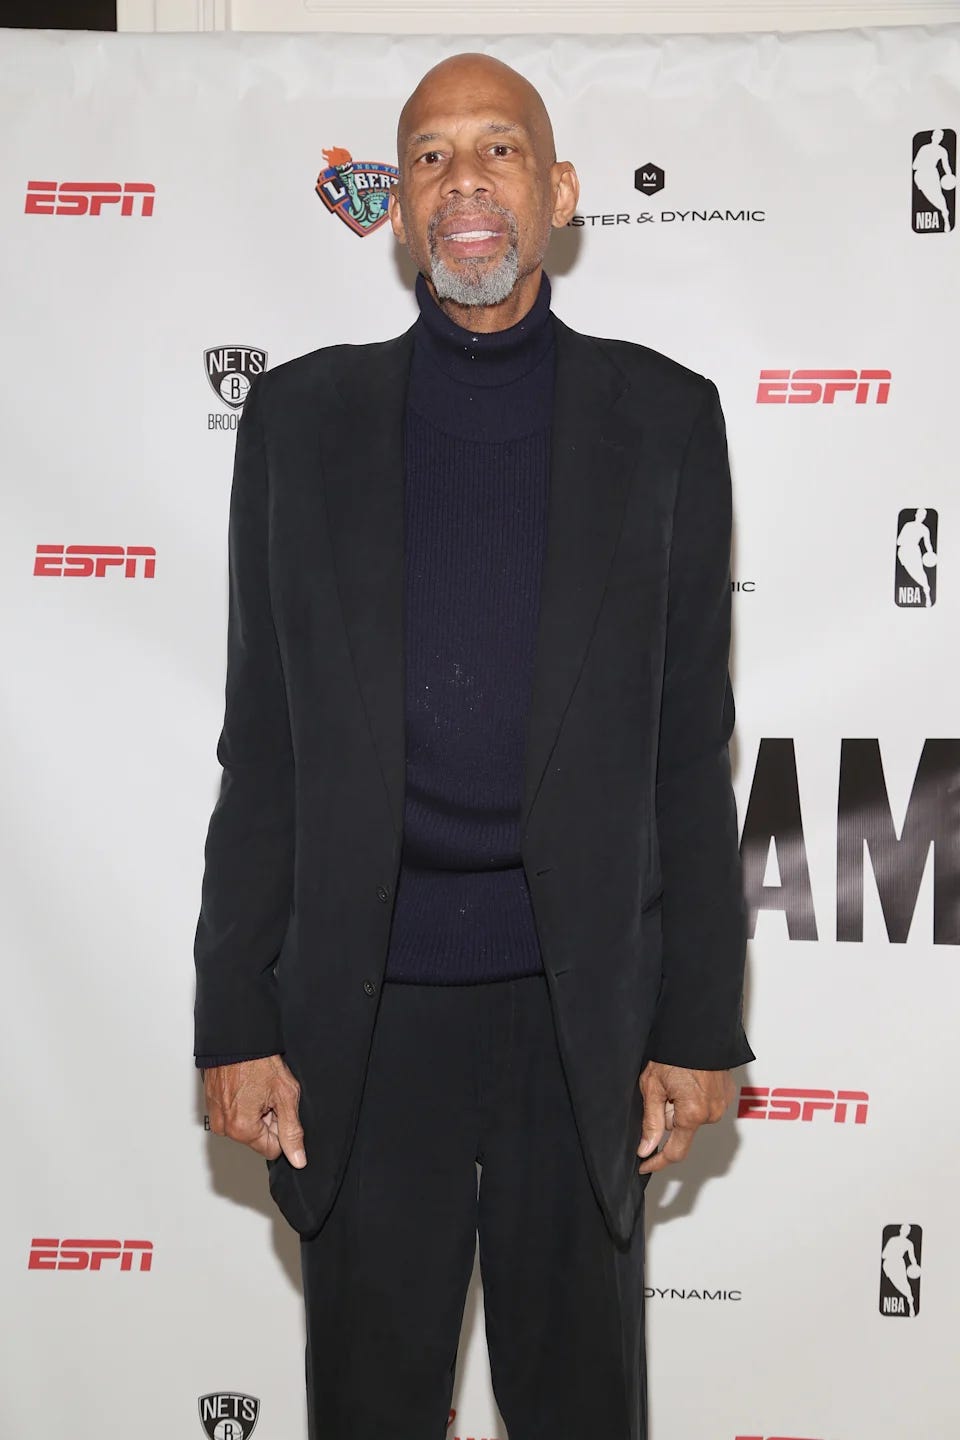 NEW YORK, NY - FEBRUARY 11: Kareem Abdul-Jabbar attends Museum Of The City Of New York Winter [Basket] Ball at Museum of the City of New York on February 11, 2020 in New York City. (Photo by Sylvain Gaboury/Patrick McMullan via Getty Images)